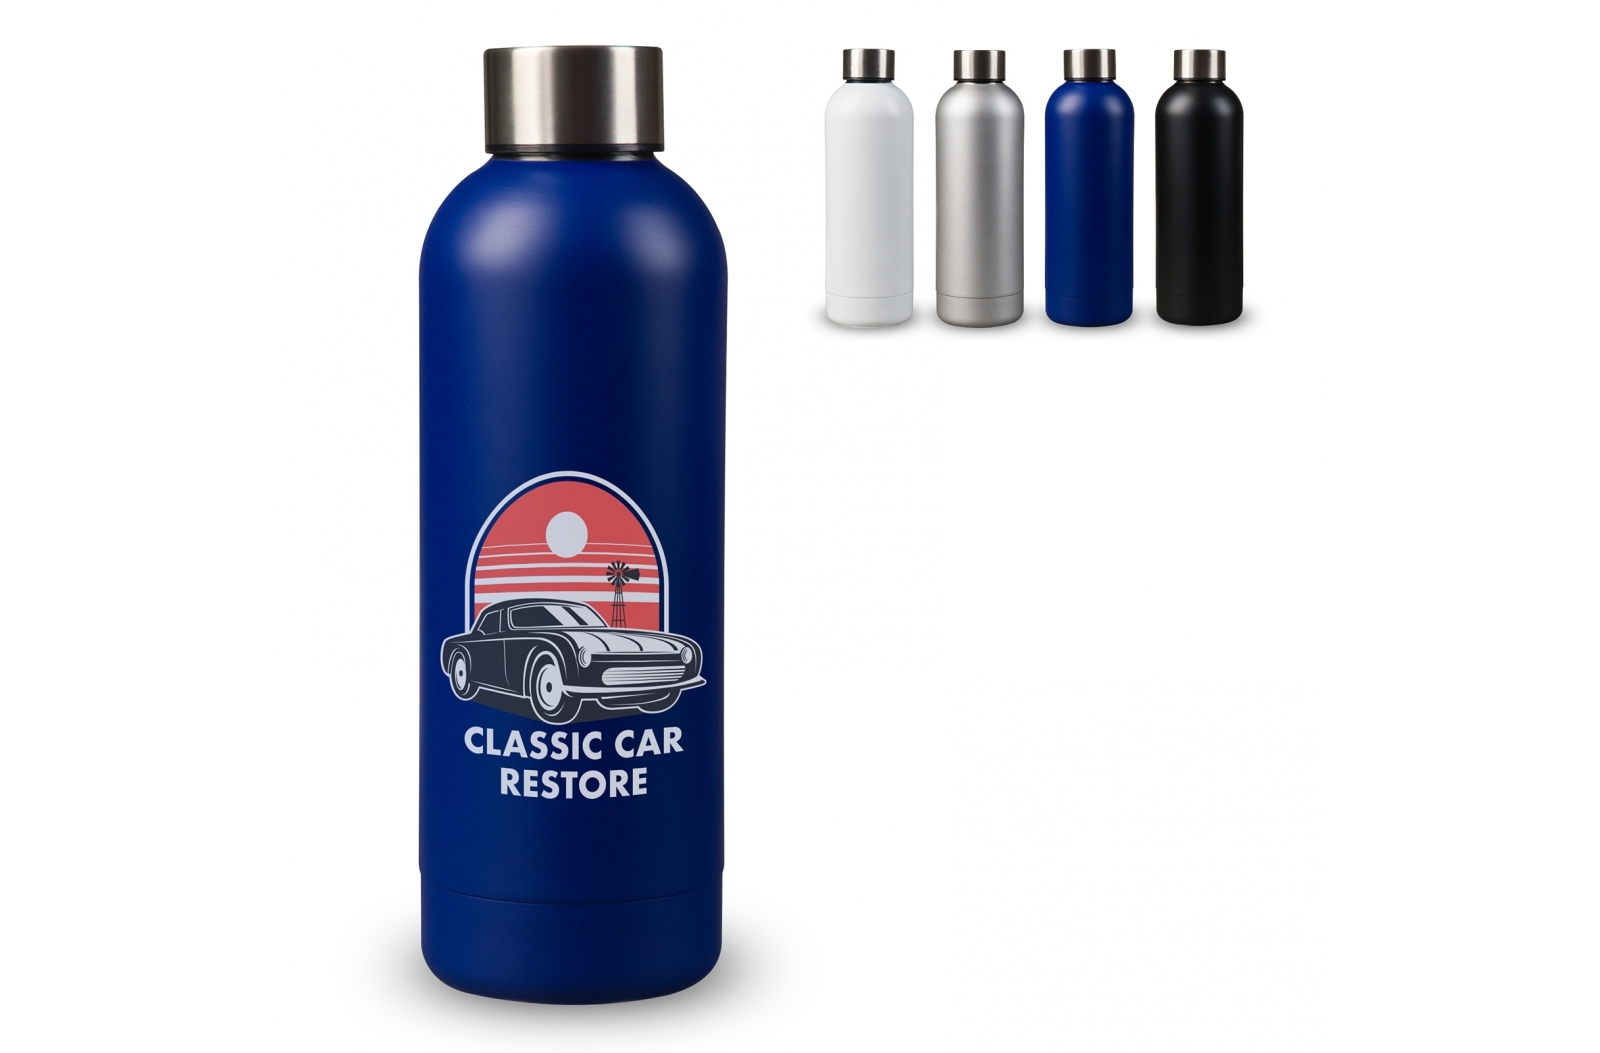 Insulated Stainless Steel Bottle - Longleat